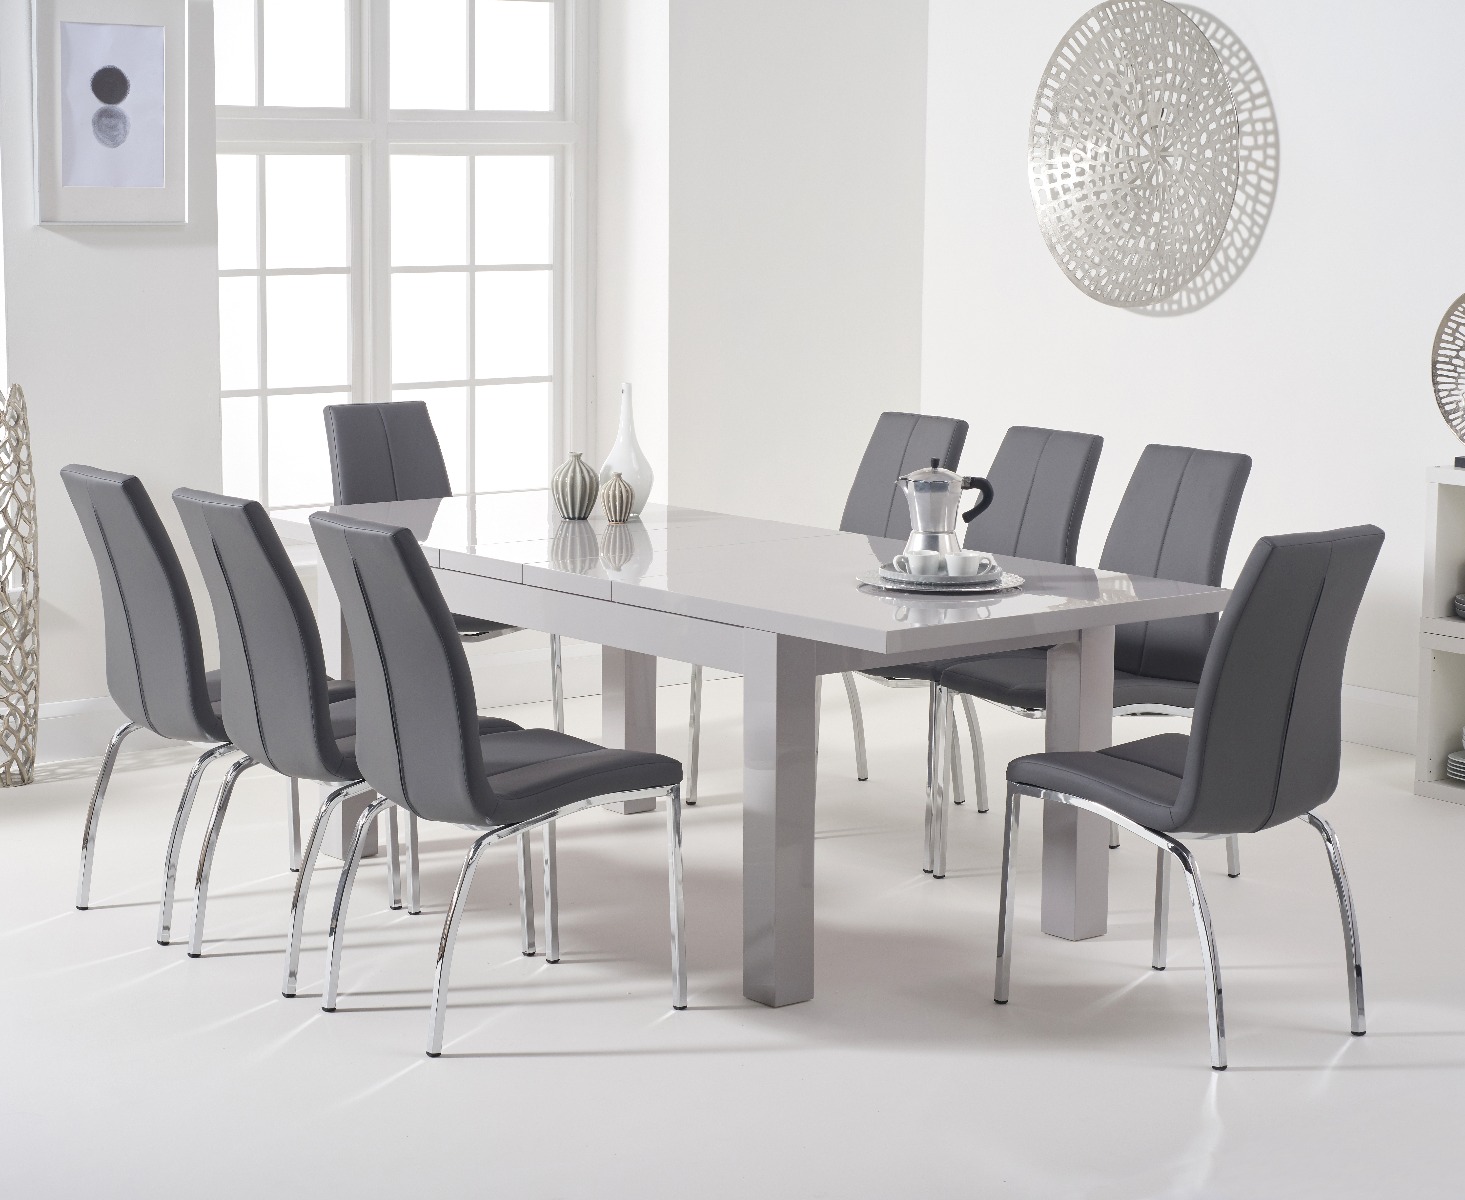 Atlanta Light Grey Gloss 160220cm Extending Dining Table With 6 Black Cavello Chairs